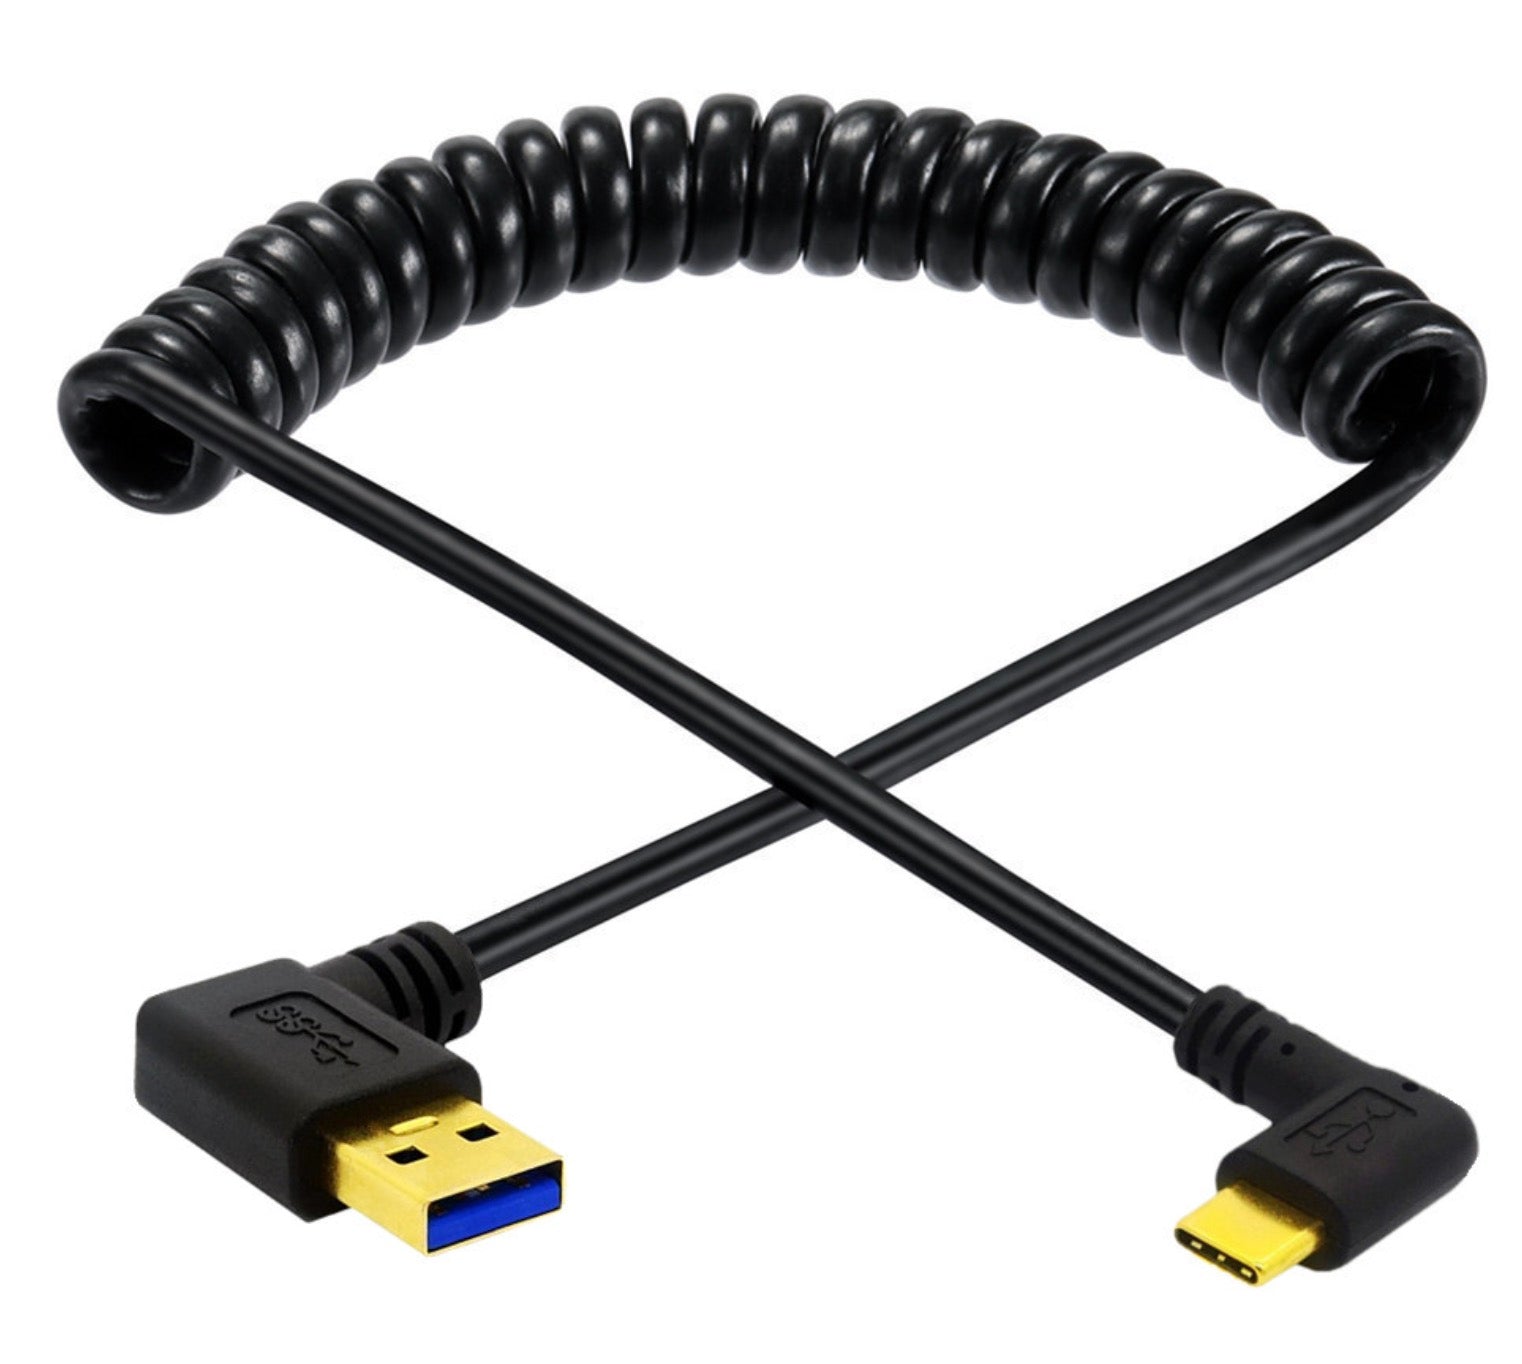 USB C Type-C Male to USB 3.0 A Male Spiral Cable - Left Angle